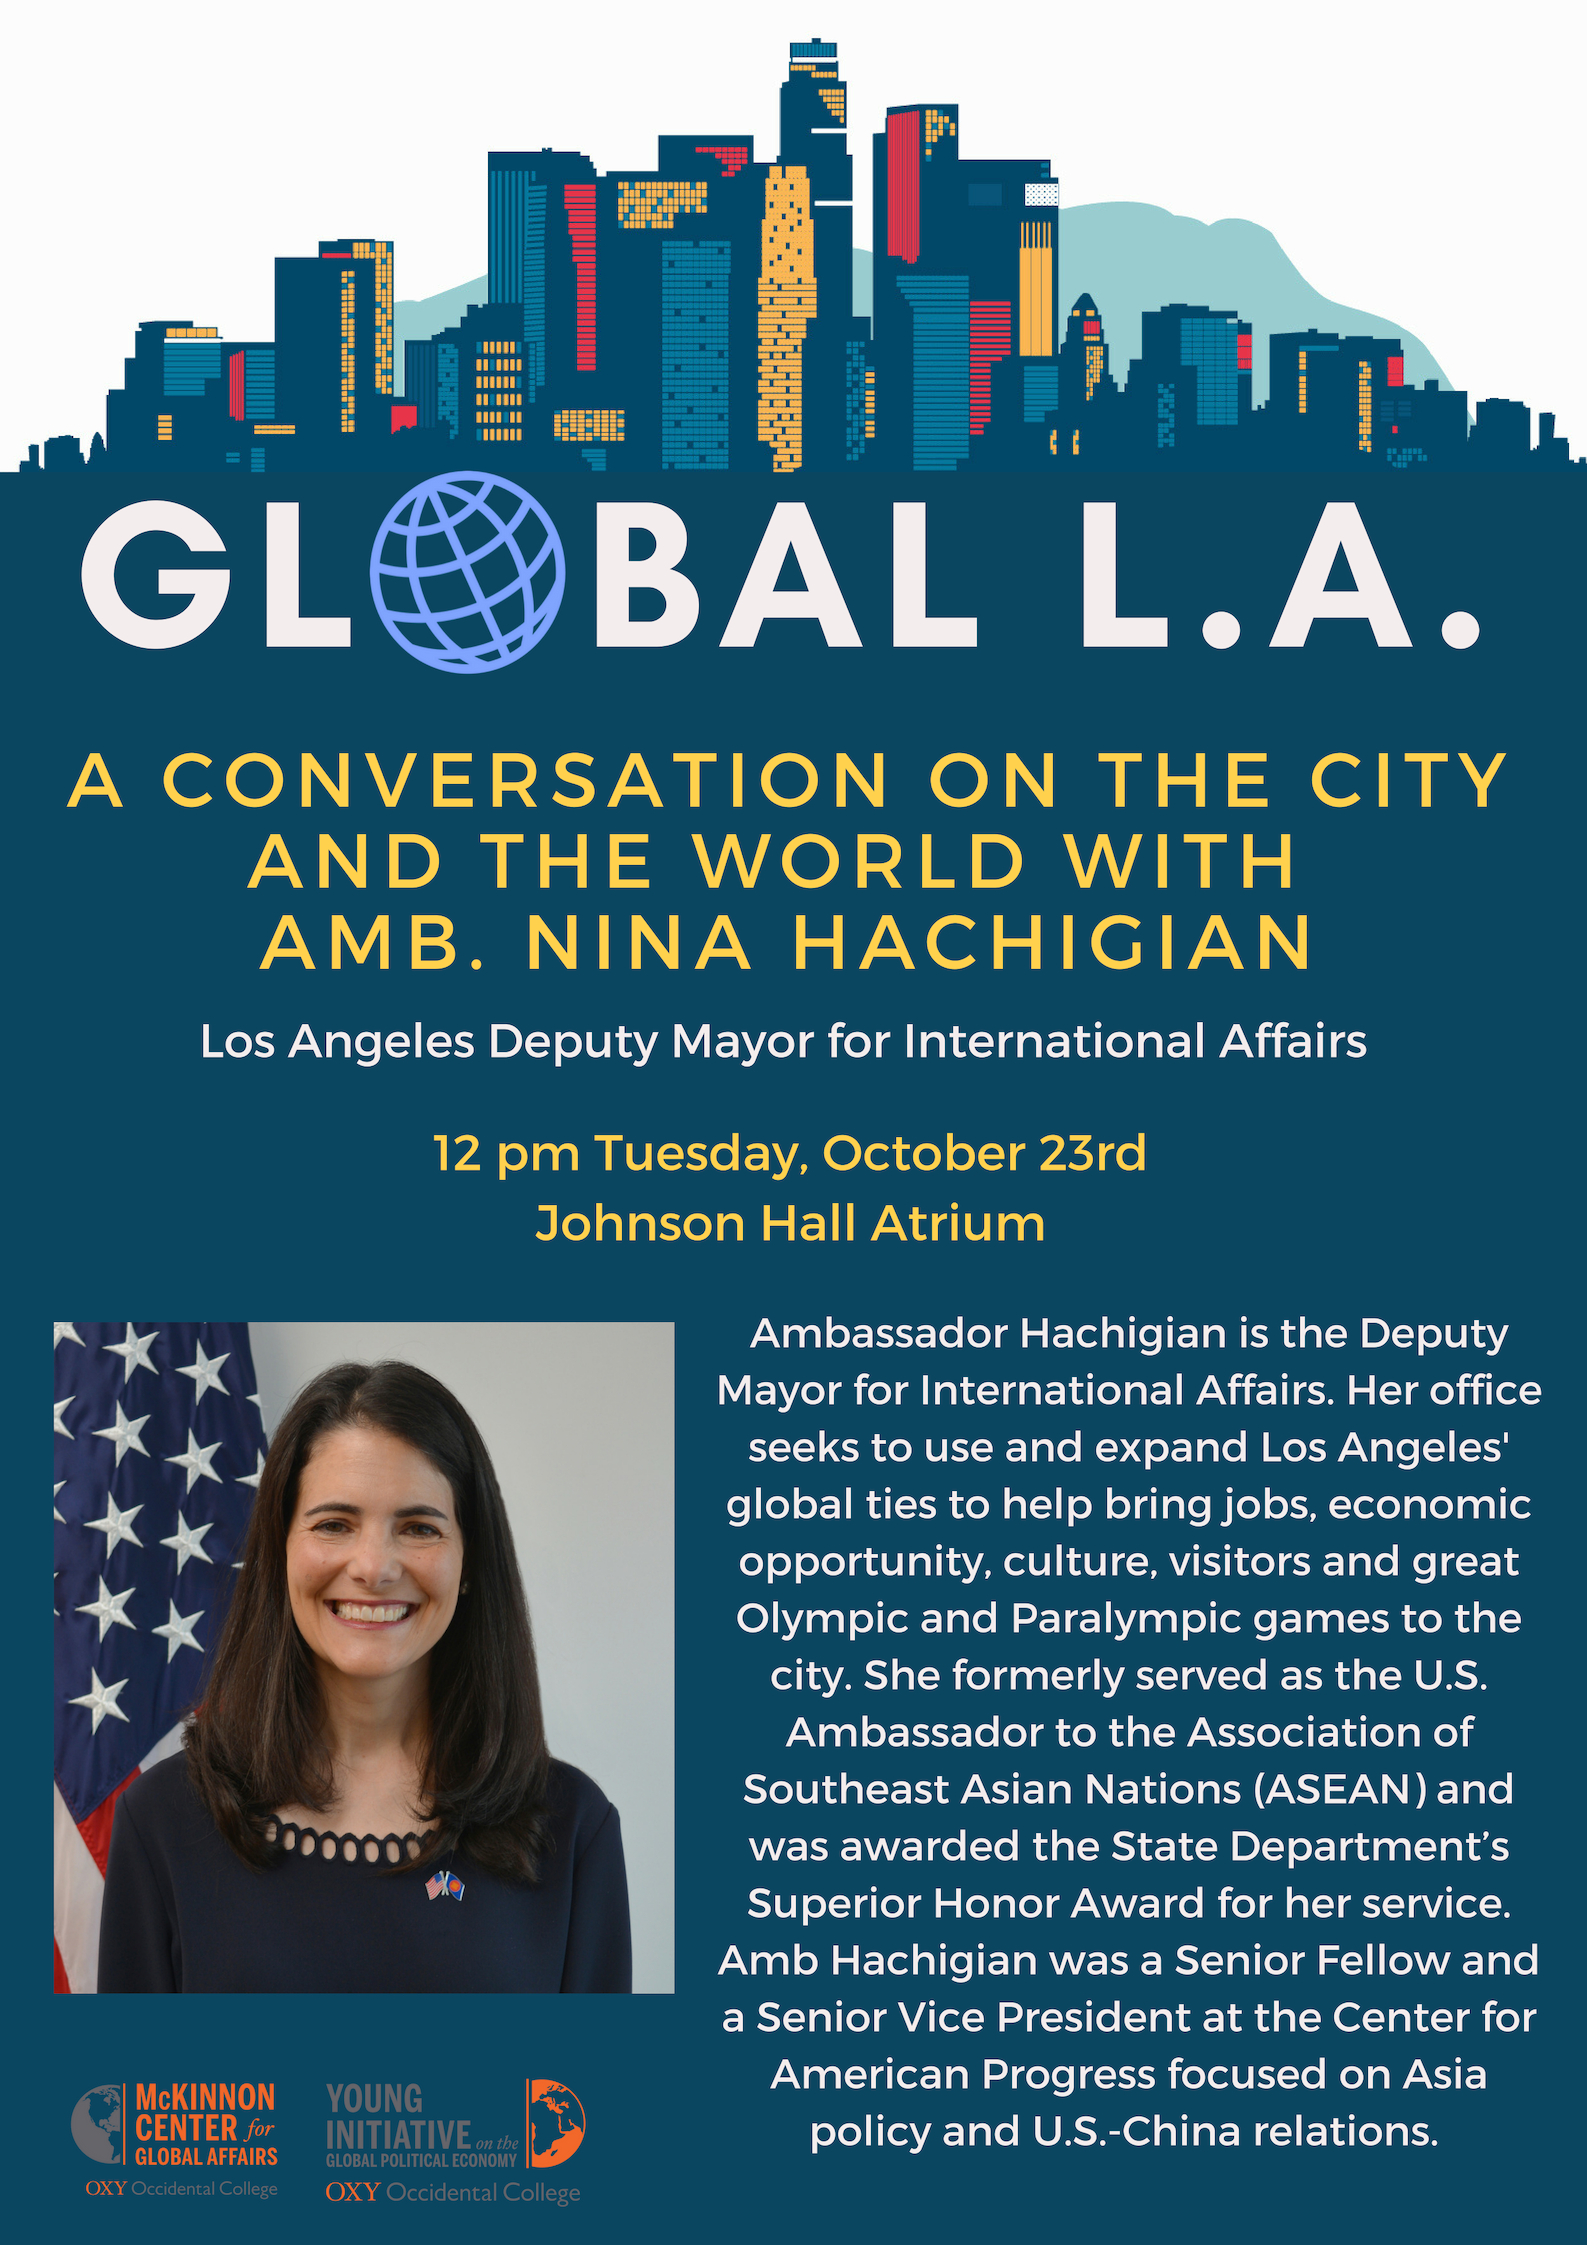 Image for Global L.A. with Amb. Hachigian Event